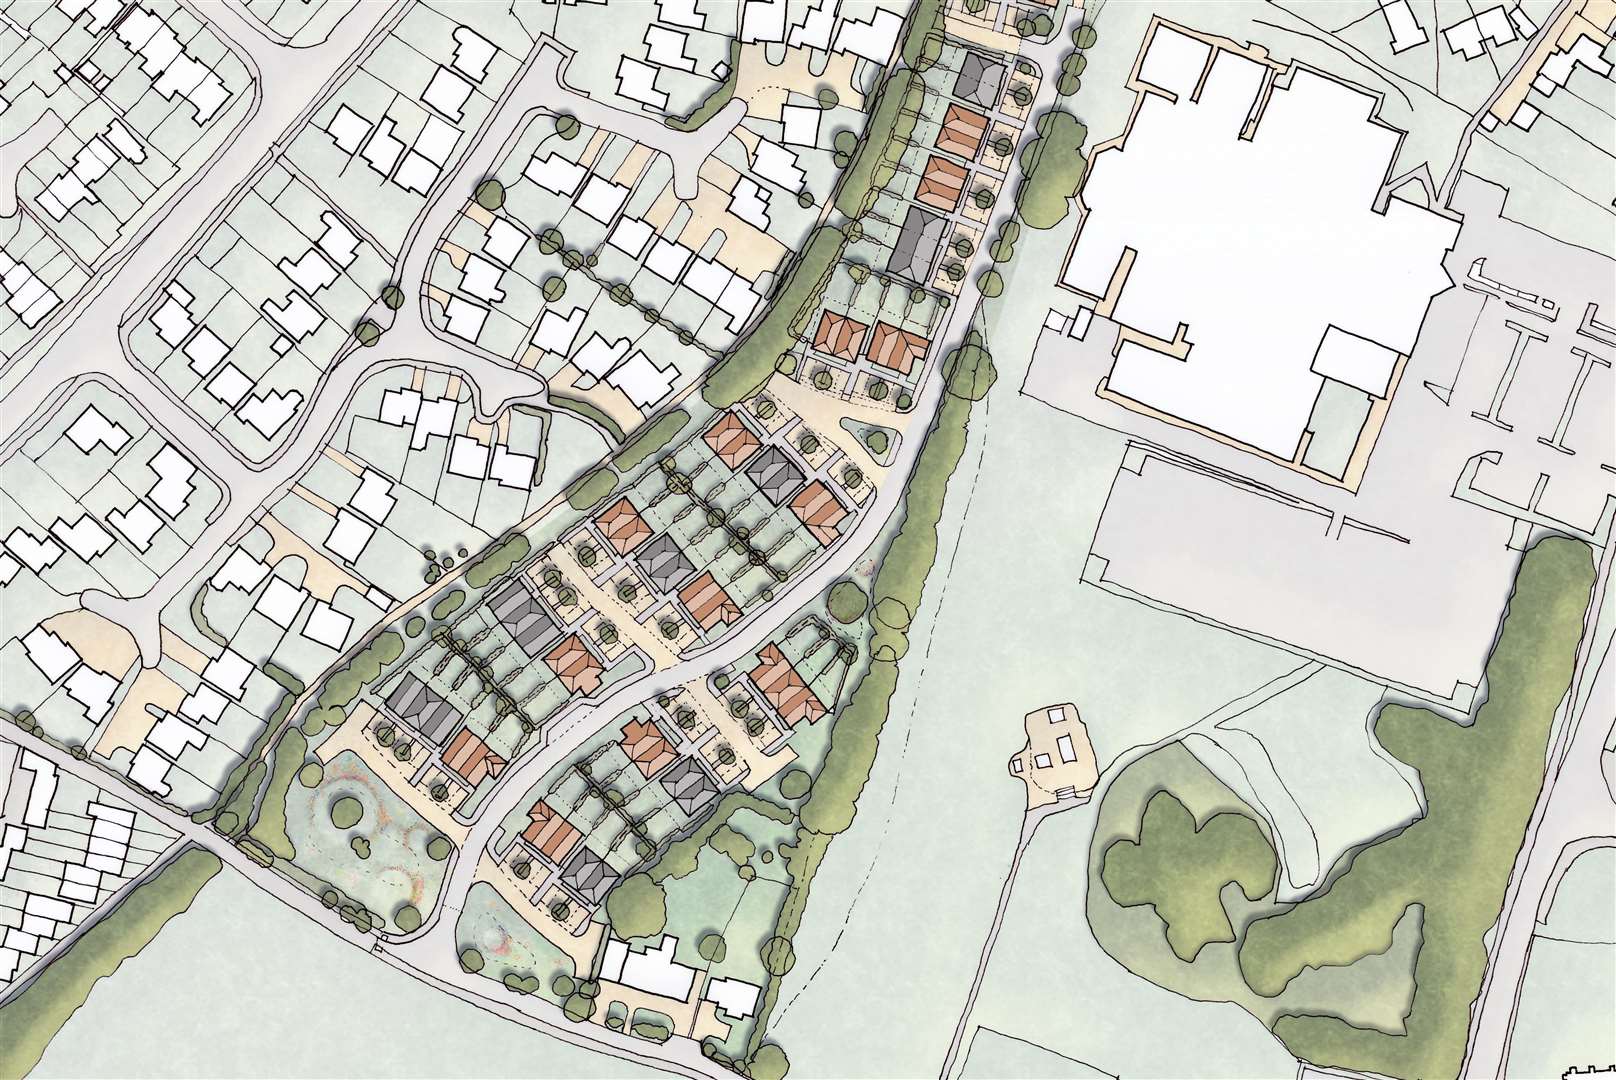 Larkfield FC site masterplan for 50 affordable homes. Image: Hollaway Studio